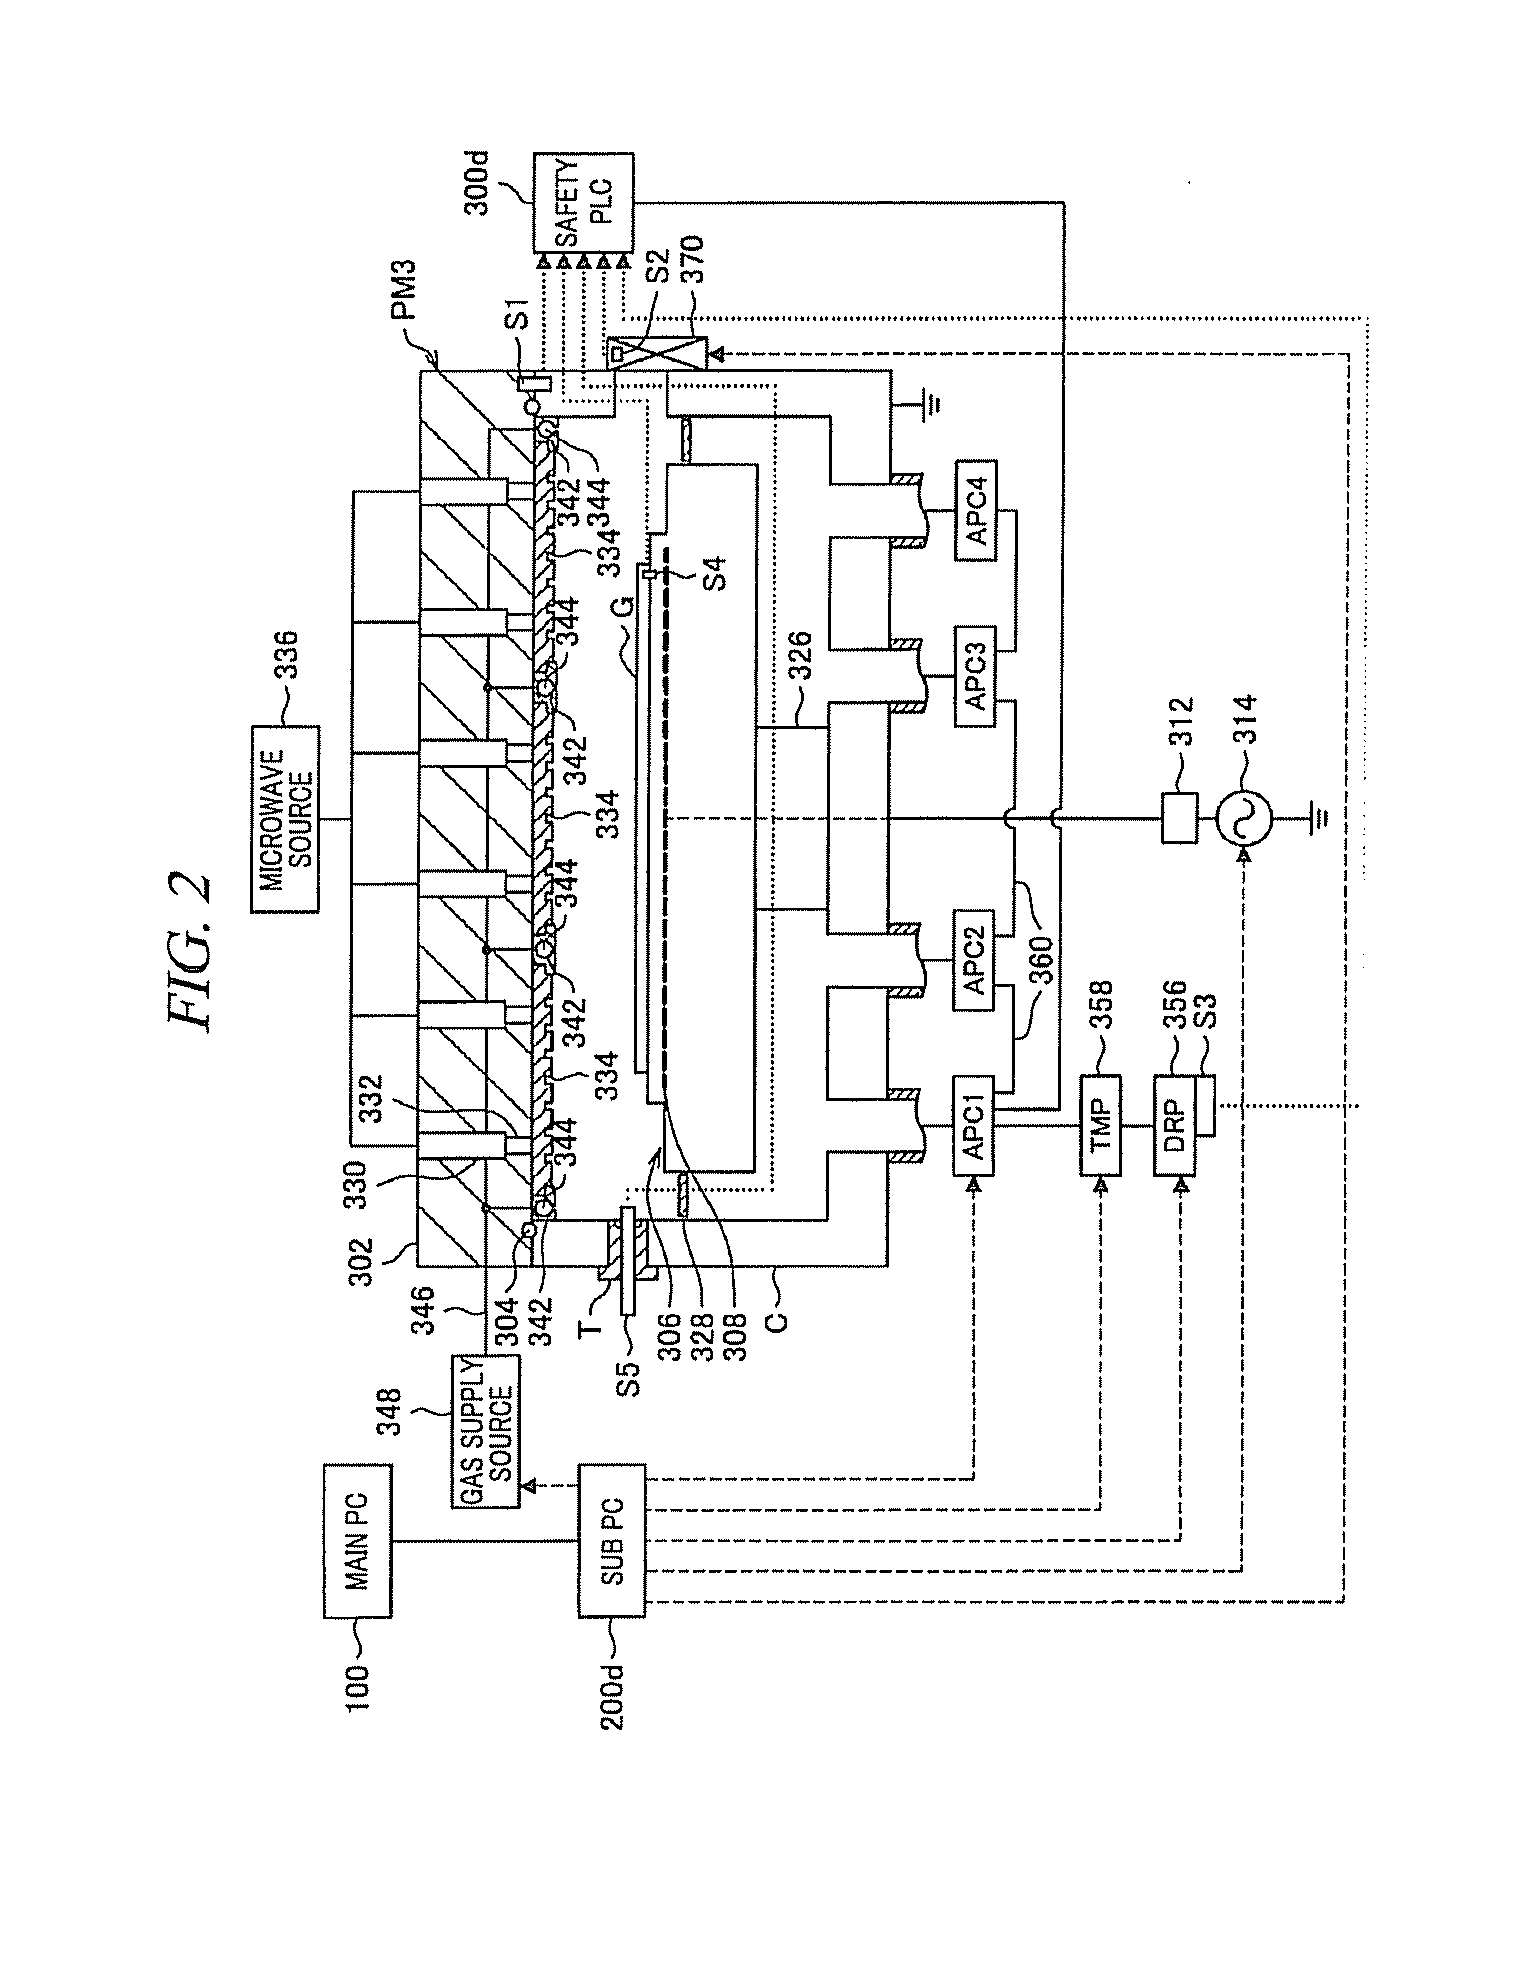 Substrate processing system, substrate processing method and storage medium storing program